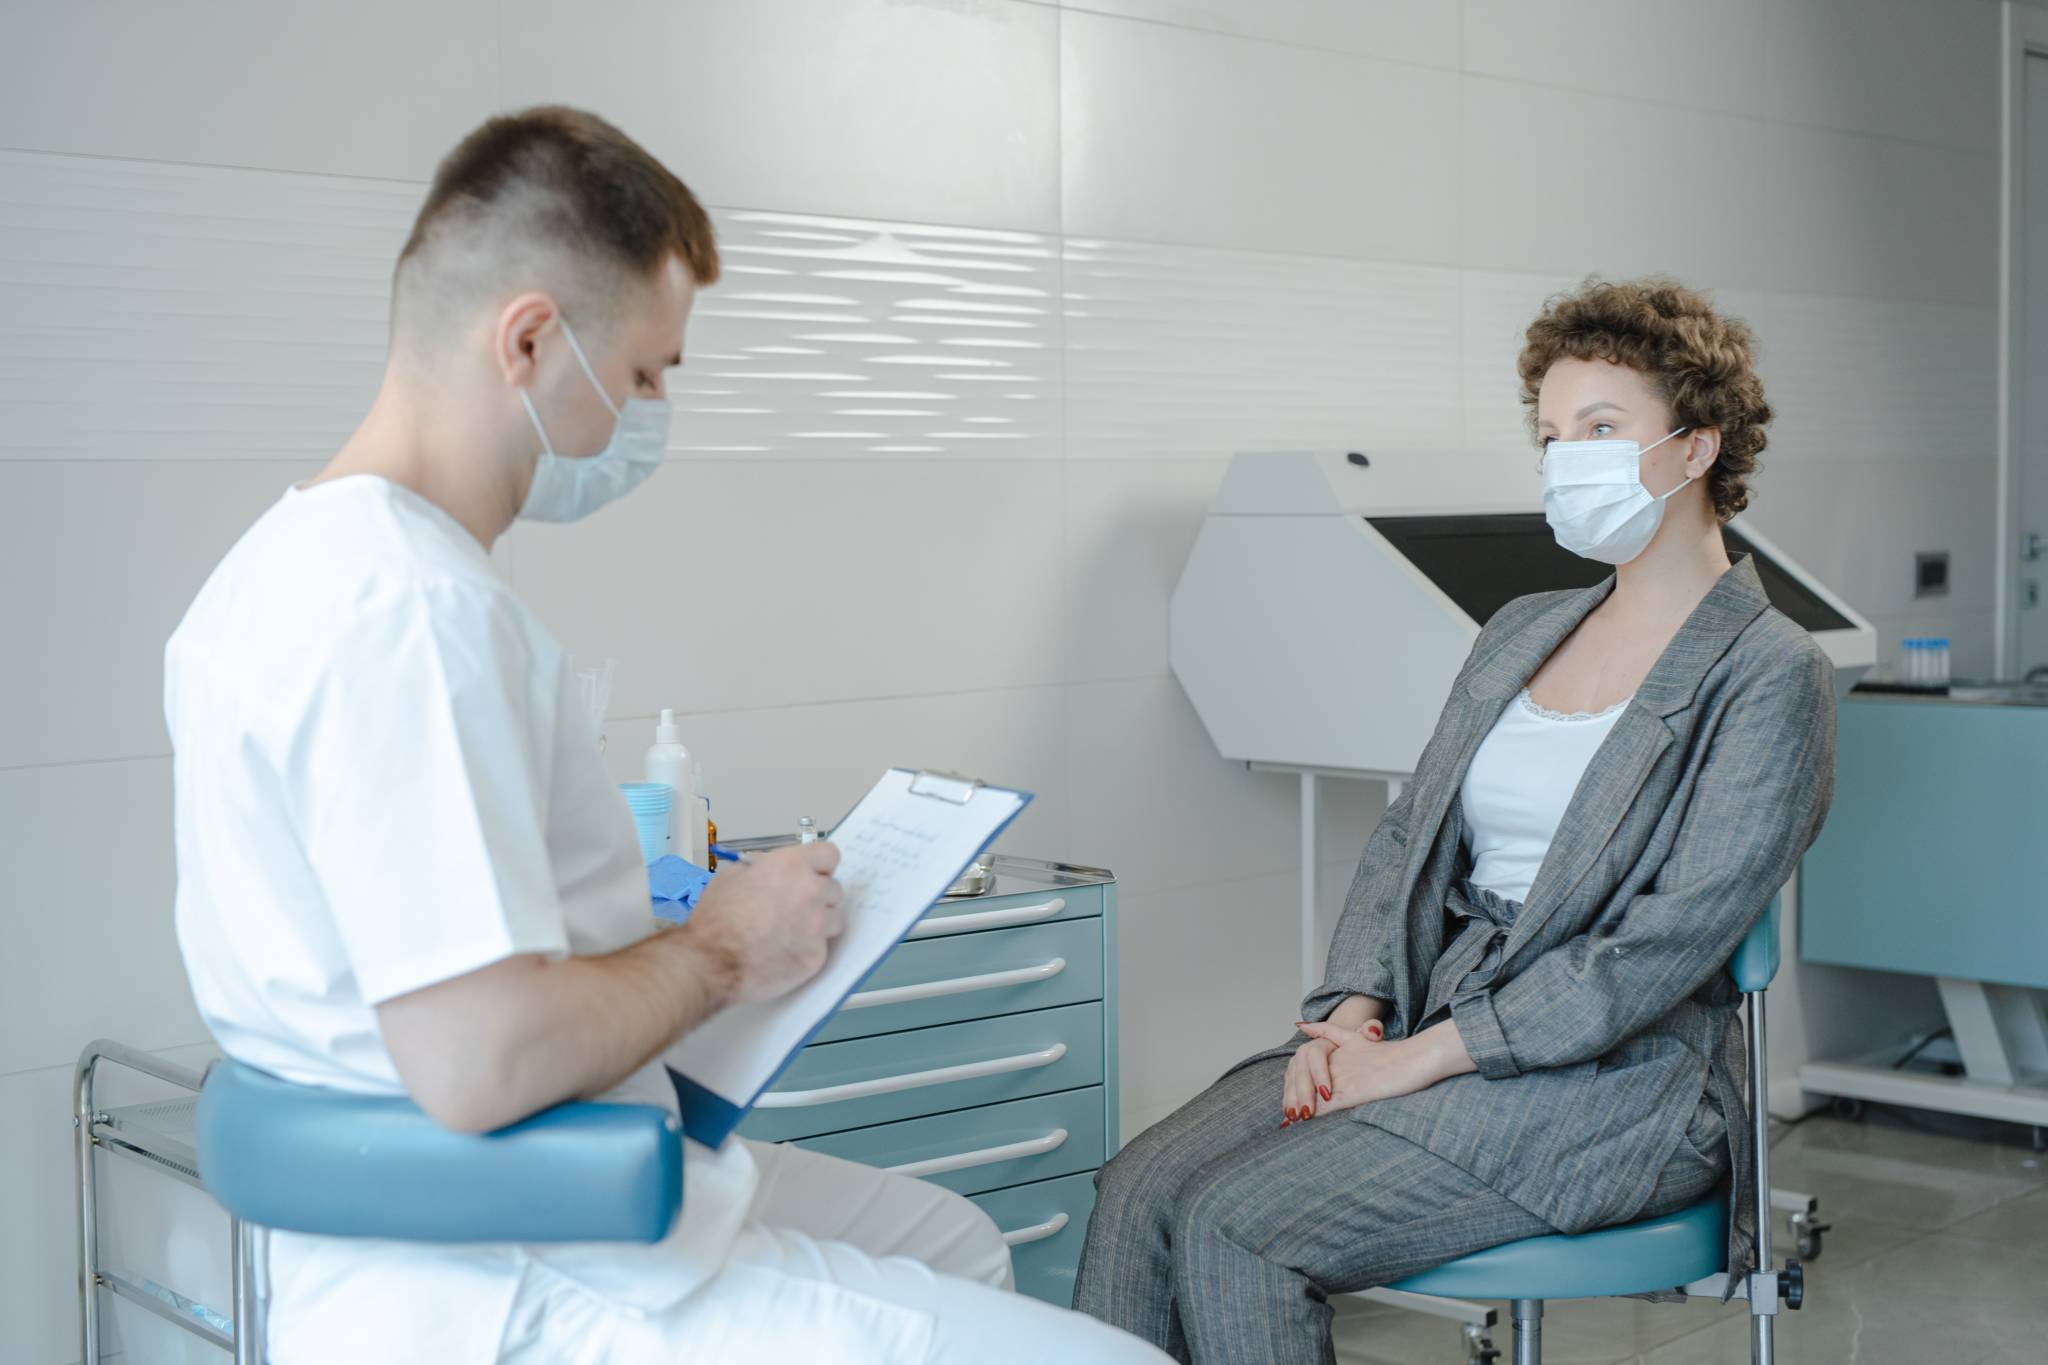 male doctor writing on notepad while speaking to female patient. both are wearing masks